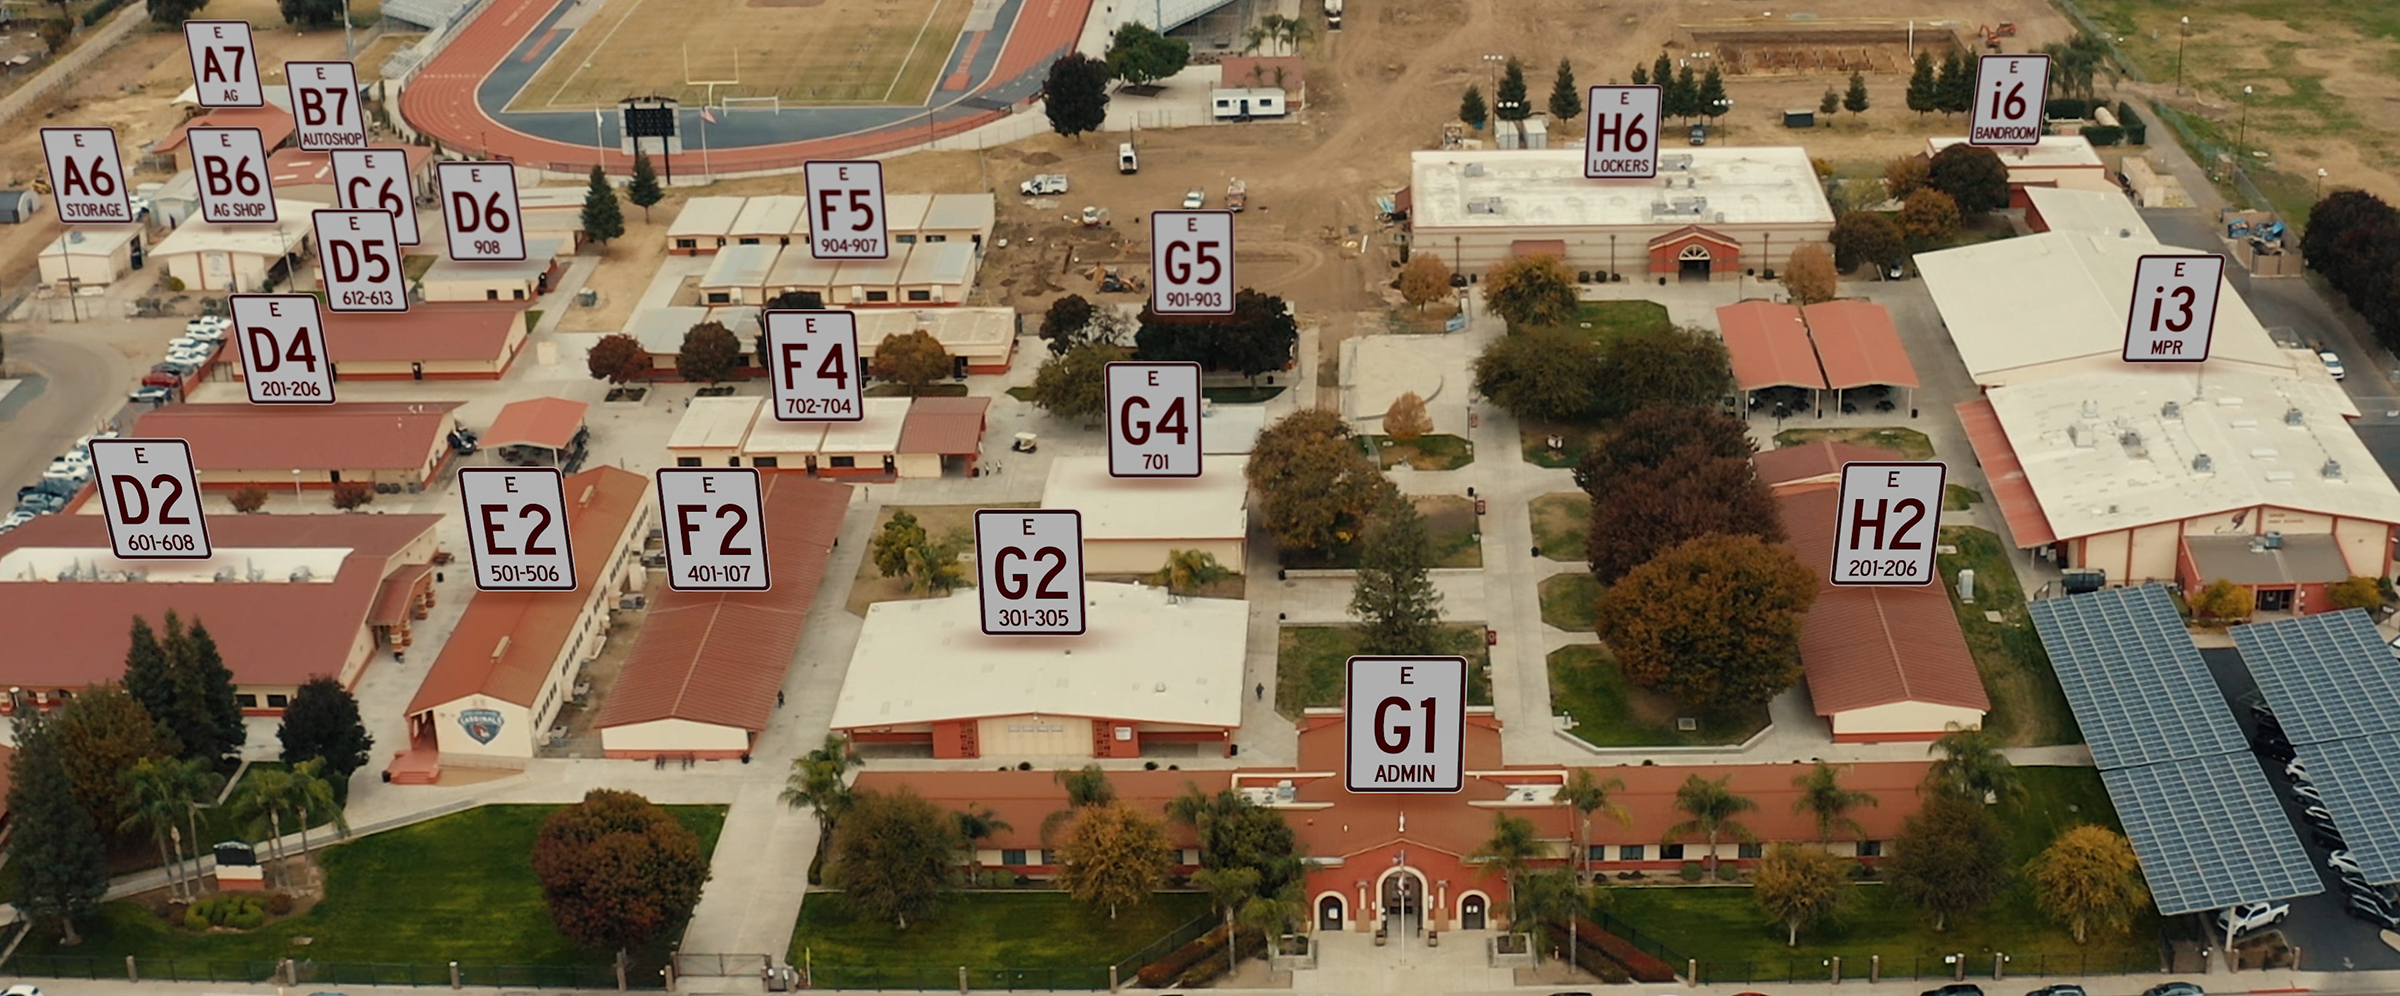 Drone footage of school campus with ActVnet building identification numbers superimposed. 